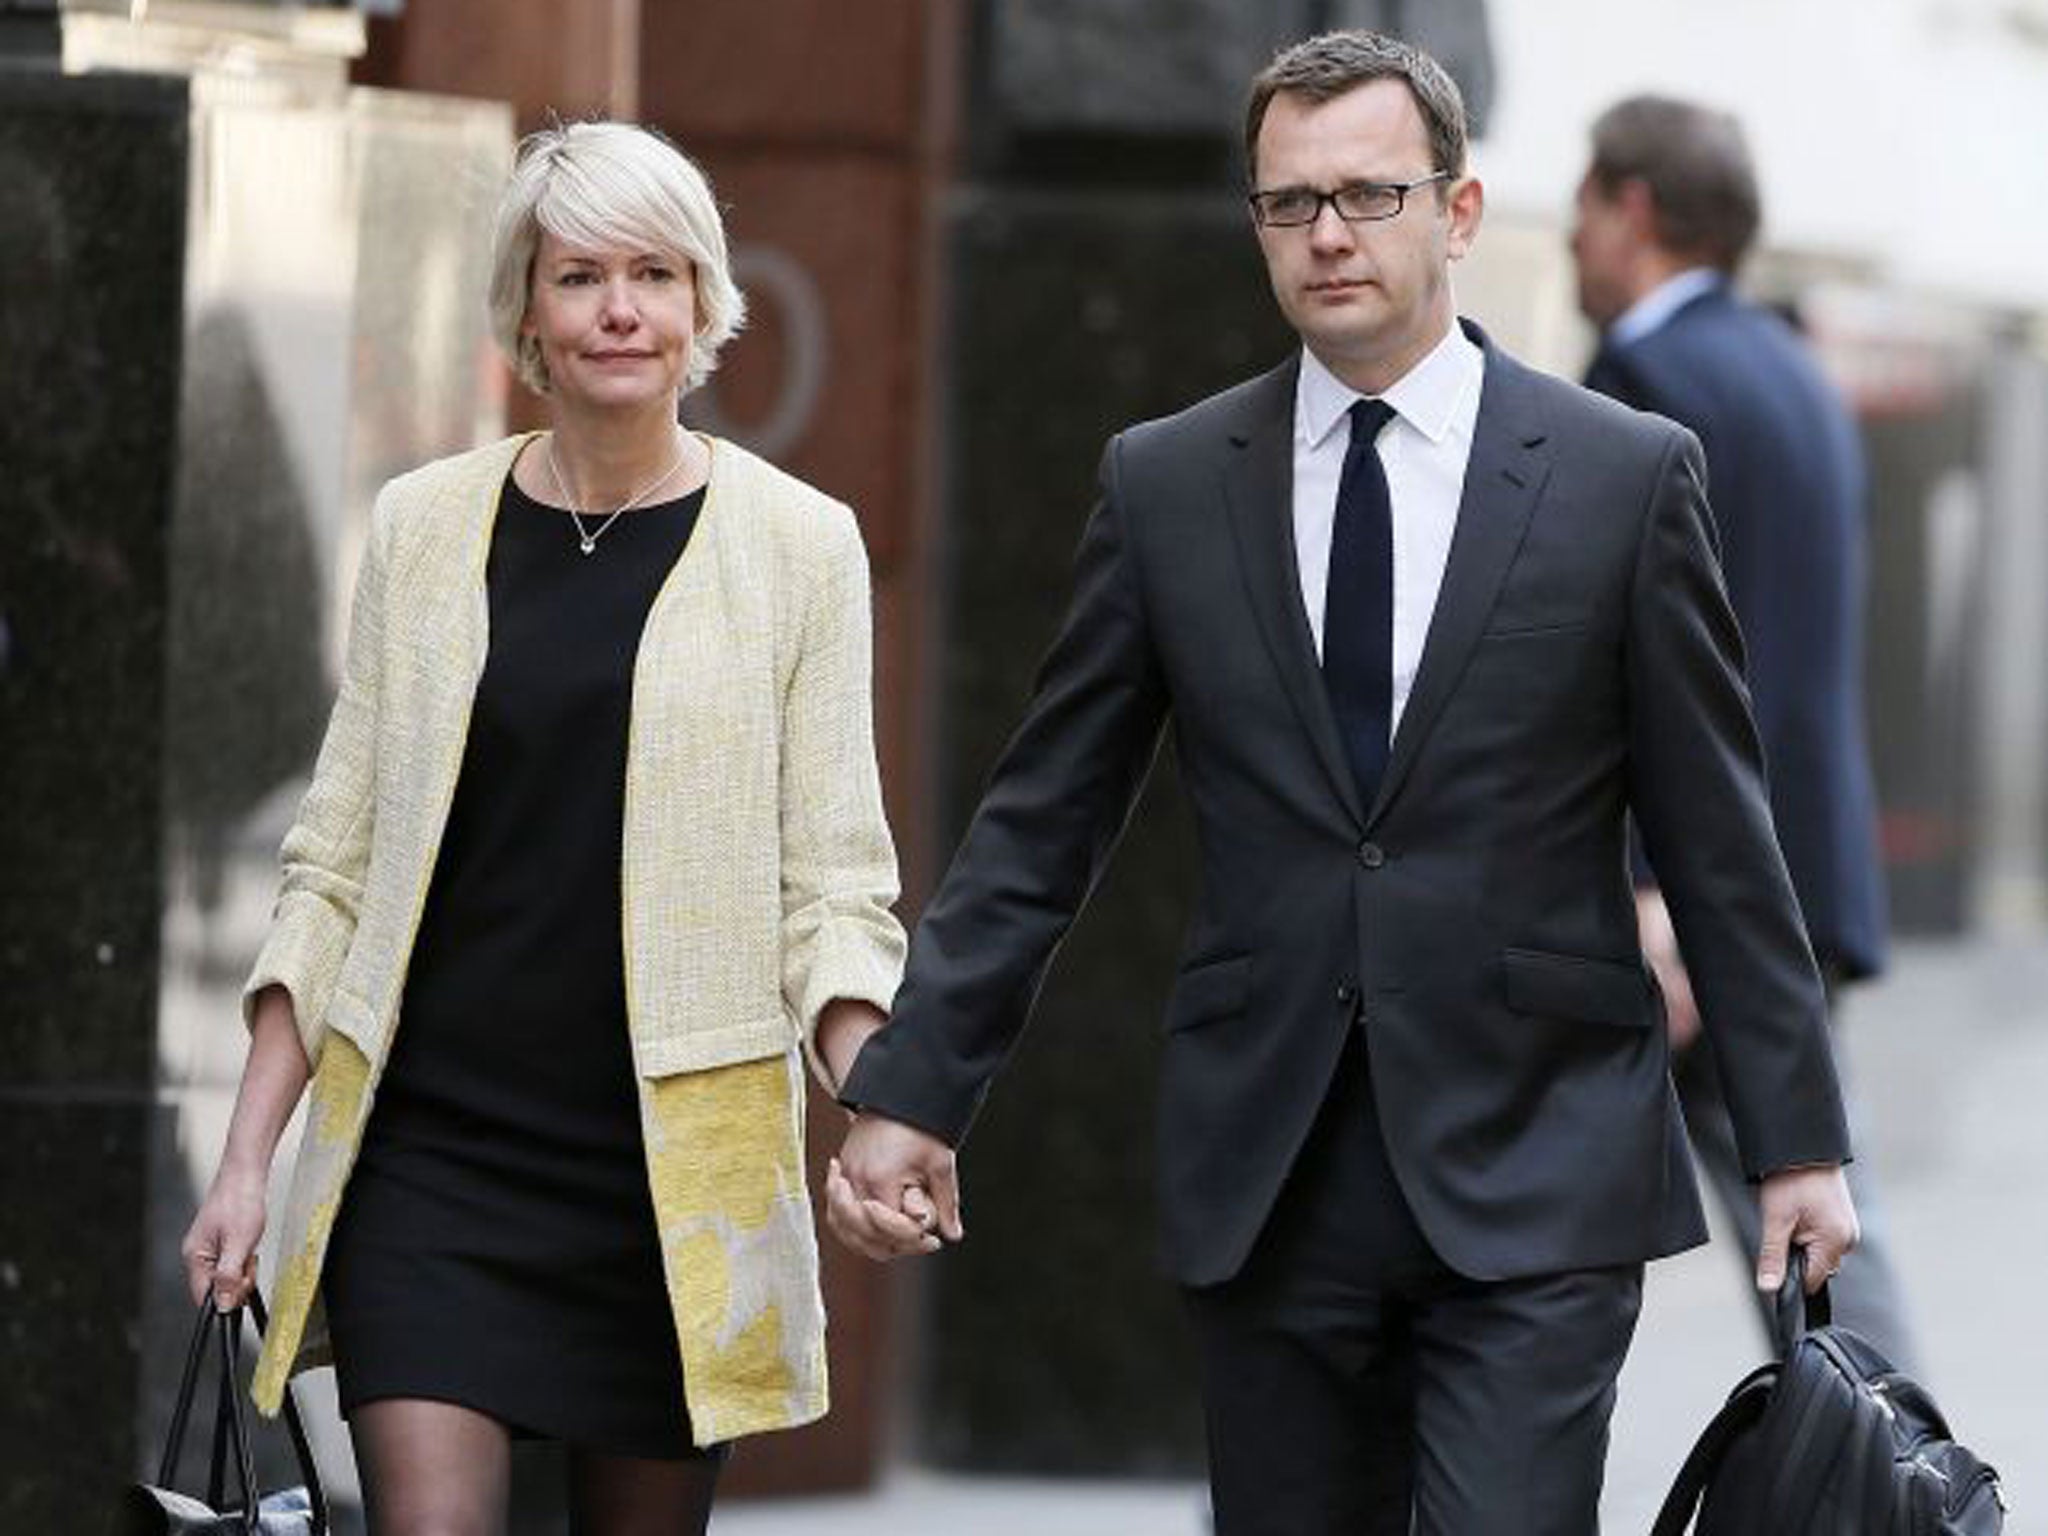 Andy Coulson and his wife, Eloise Patrick, arrive at the Old Bailey